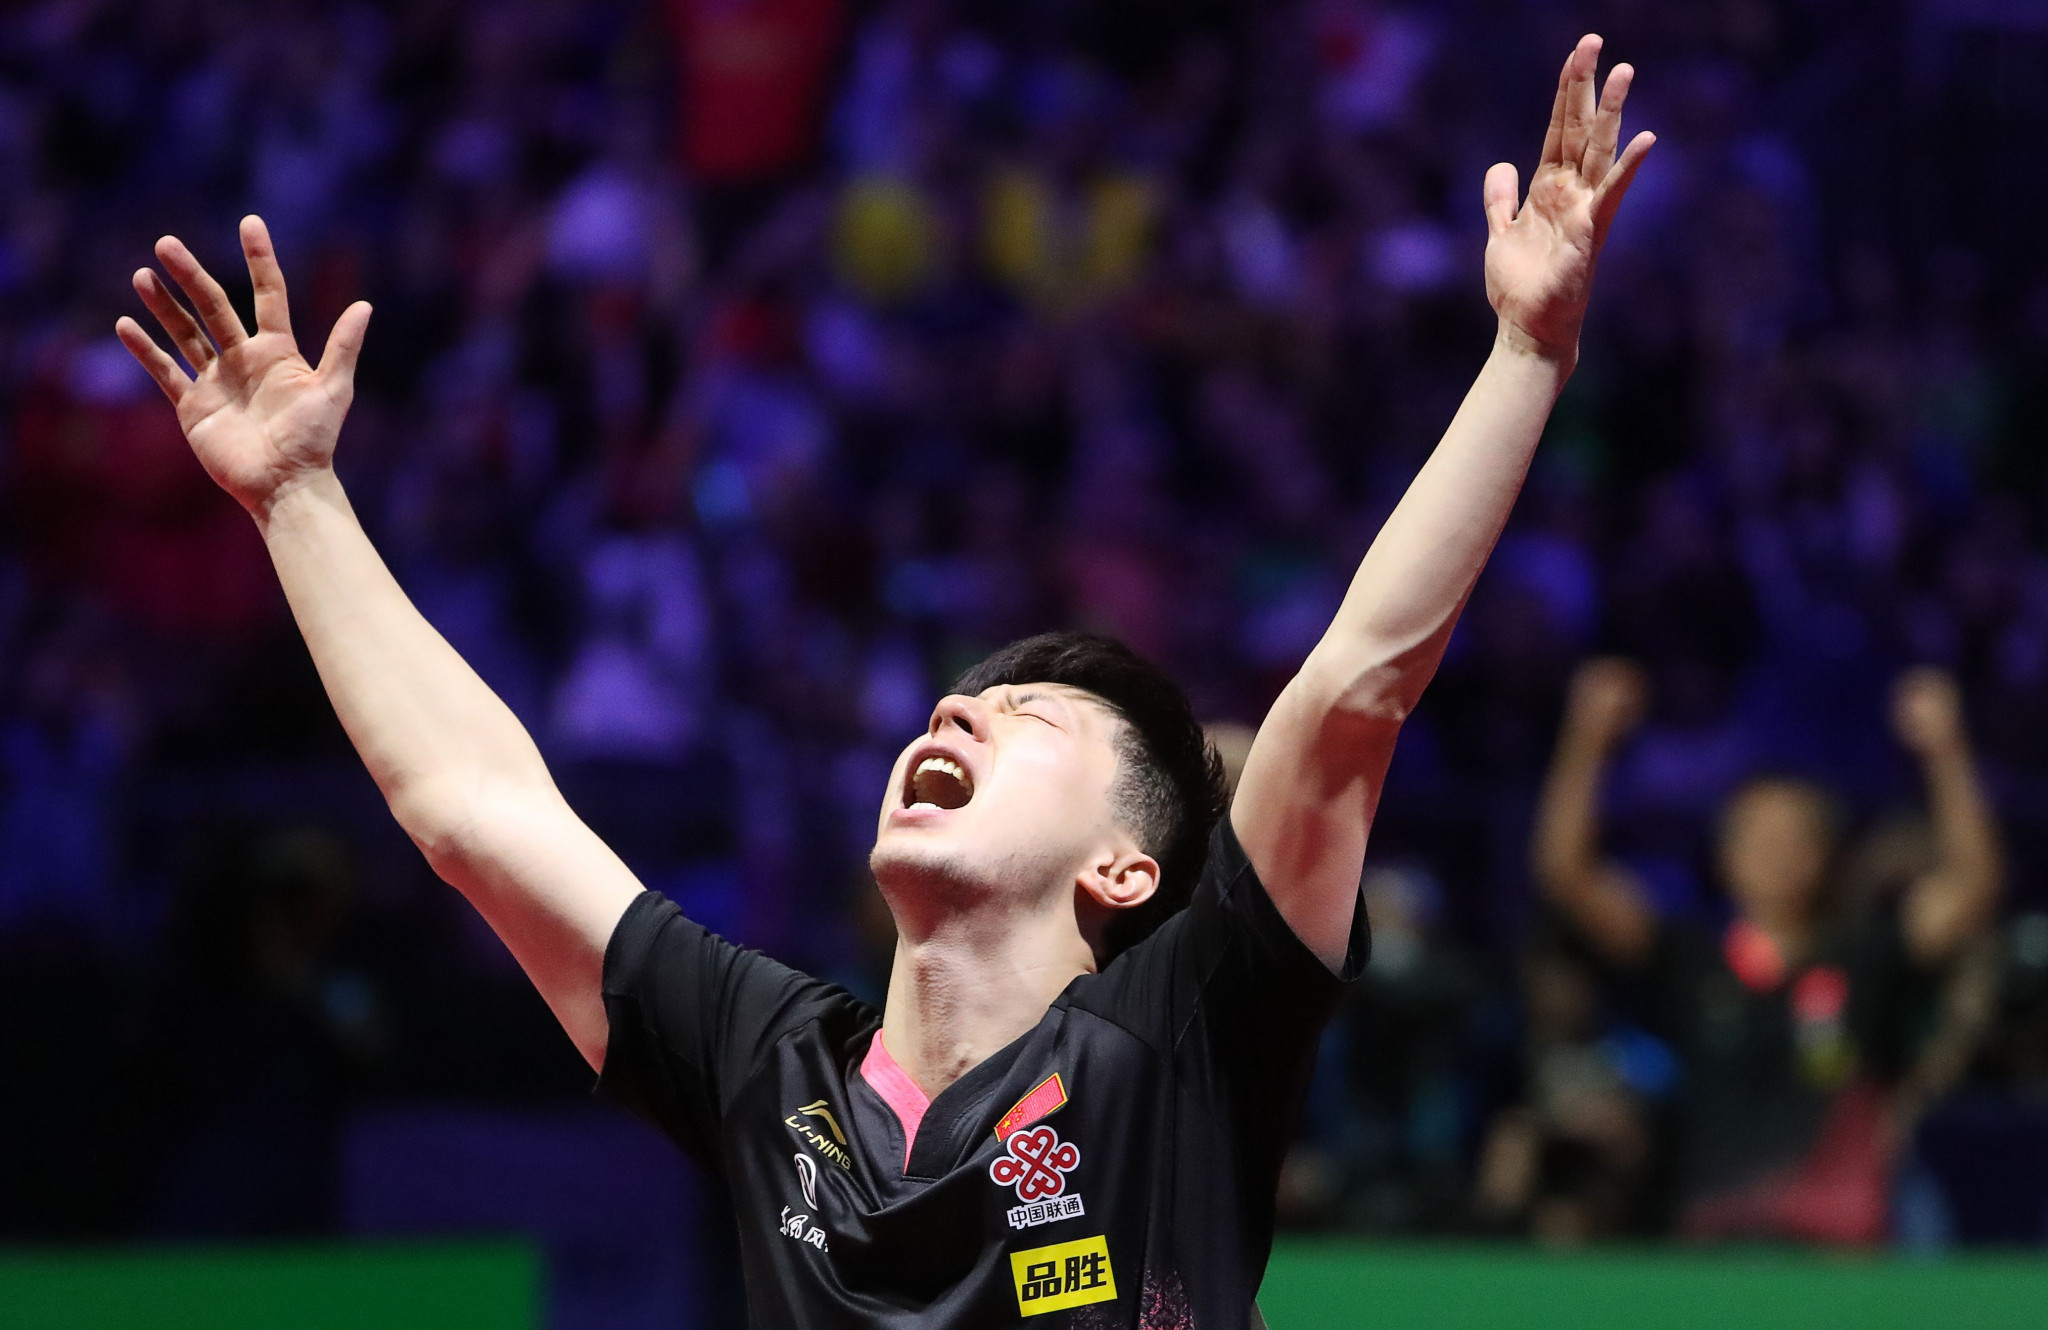 Ma secures third consecutive title as China complete clean sweep at ITTF World Championships